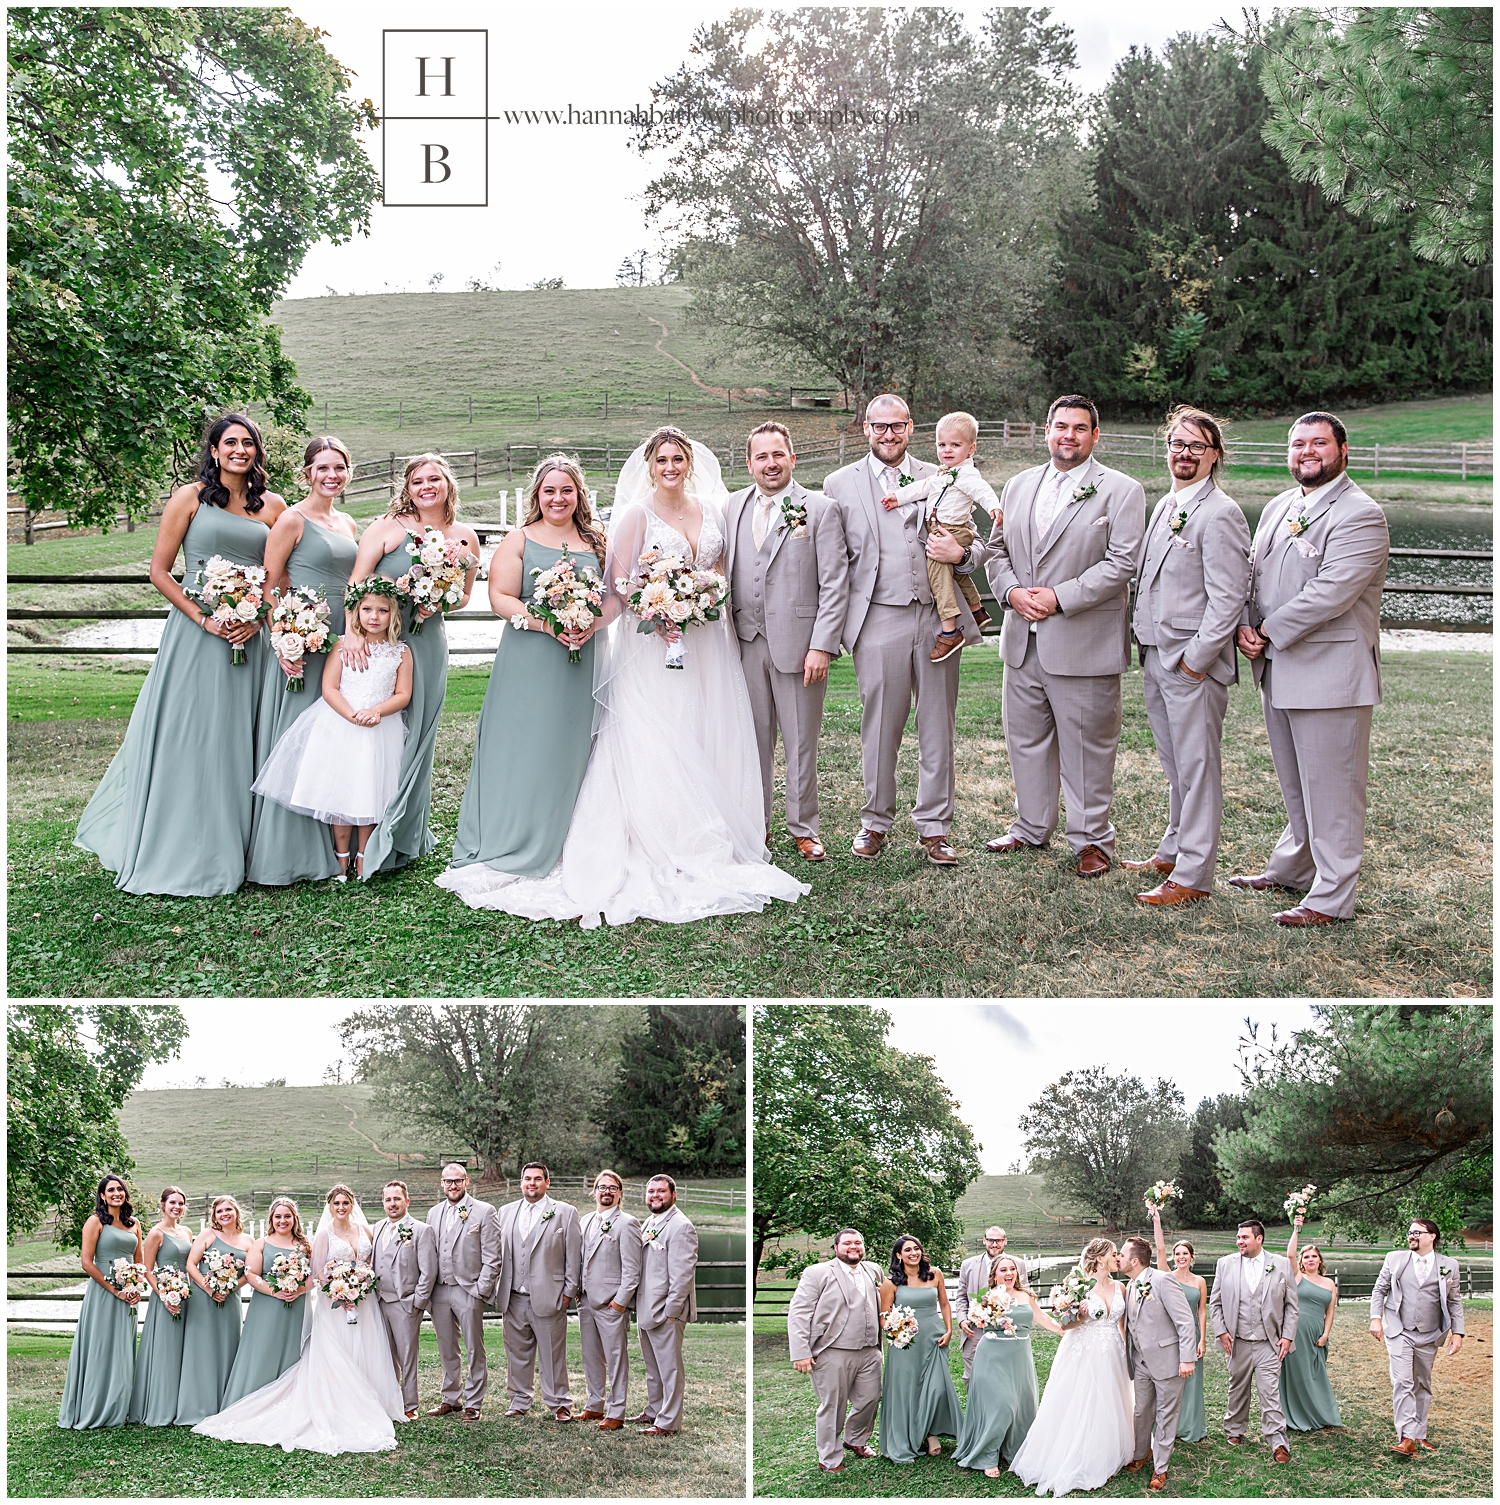 Bridesmaids in sage green dresses pose with groomsmen in tan tuxes for bridal party photos.